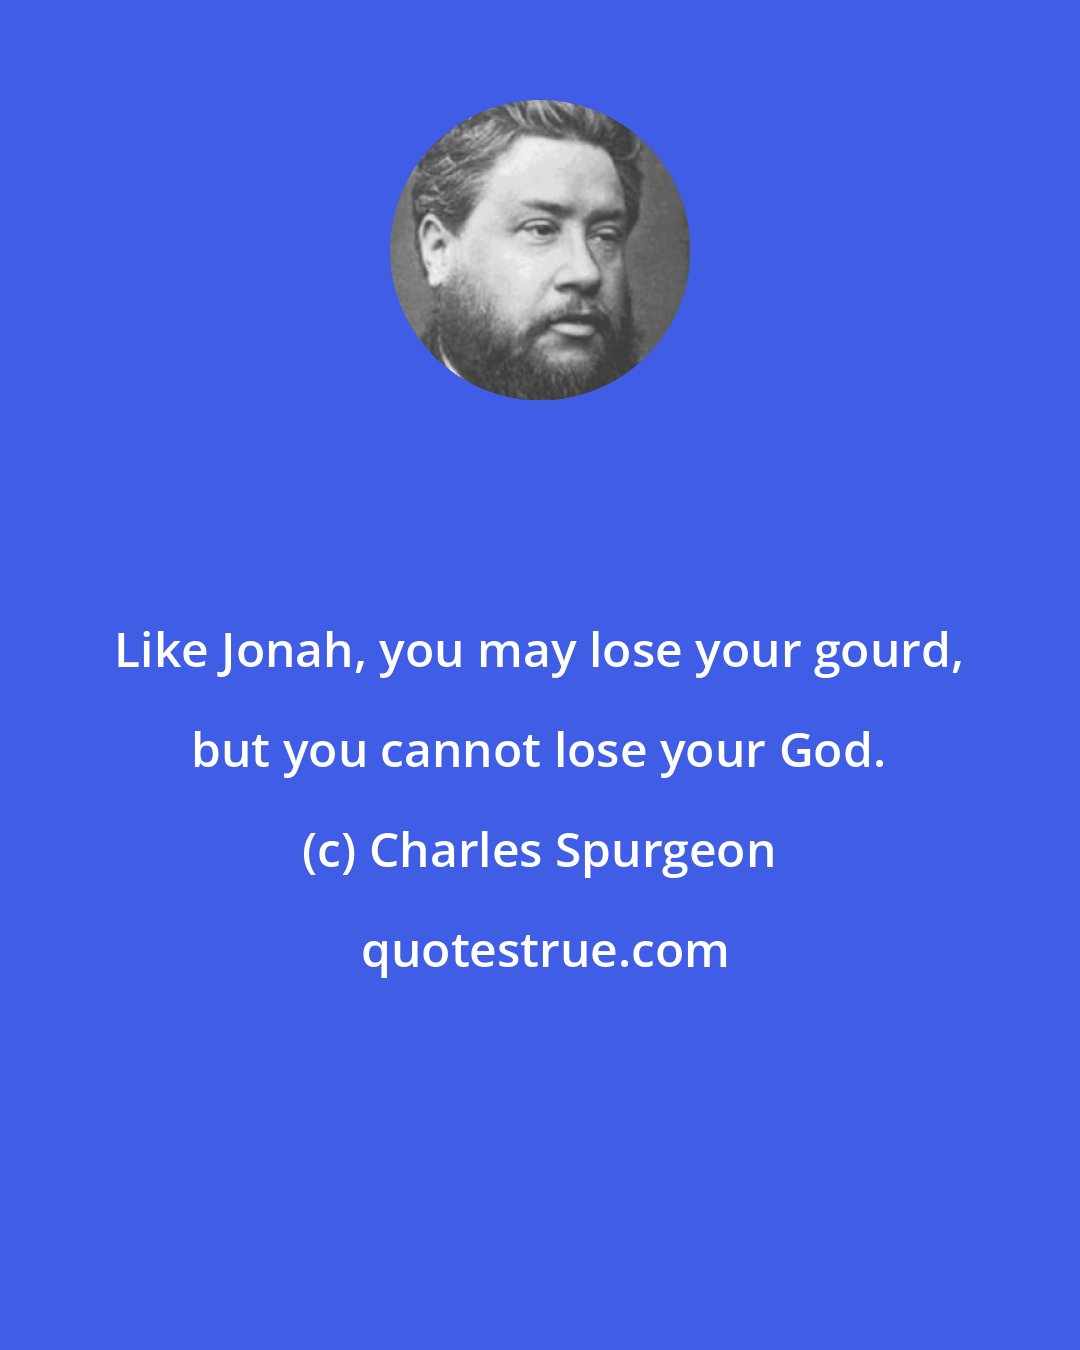 Charles Spurgeon: Like Jonah, you may lose your gourd, but you cannot lose your God.